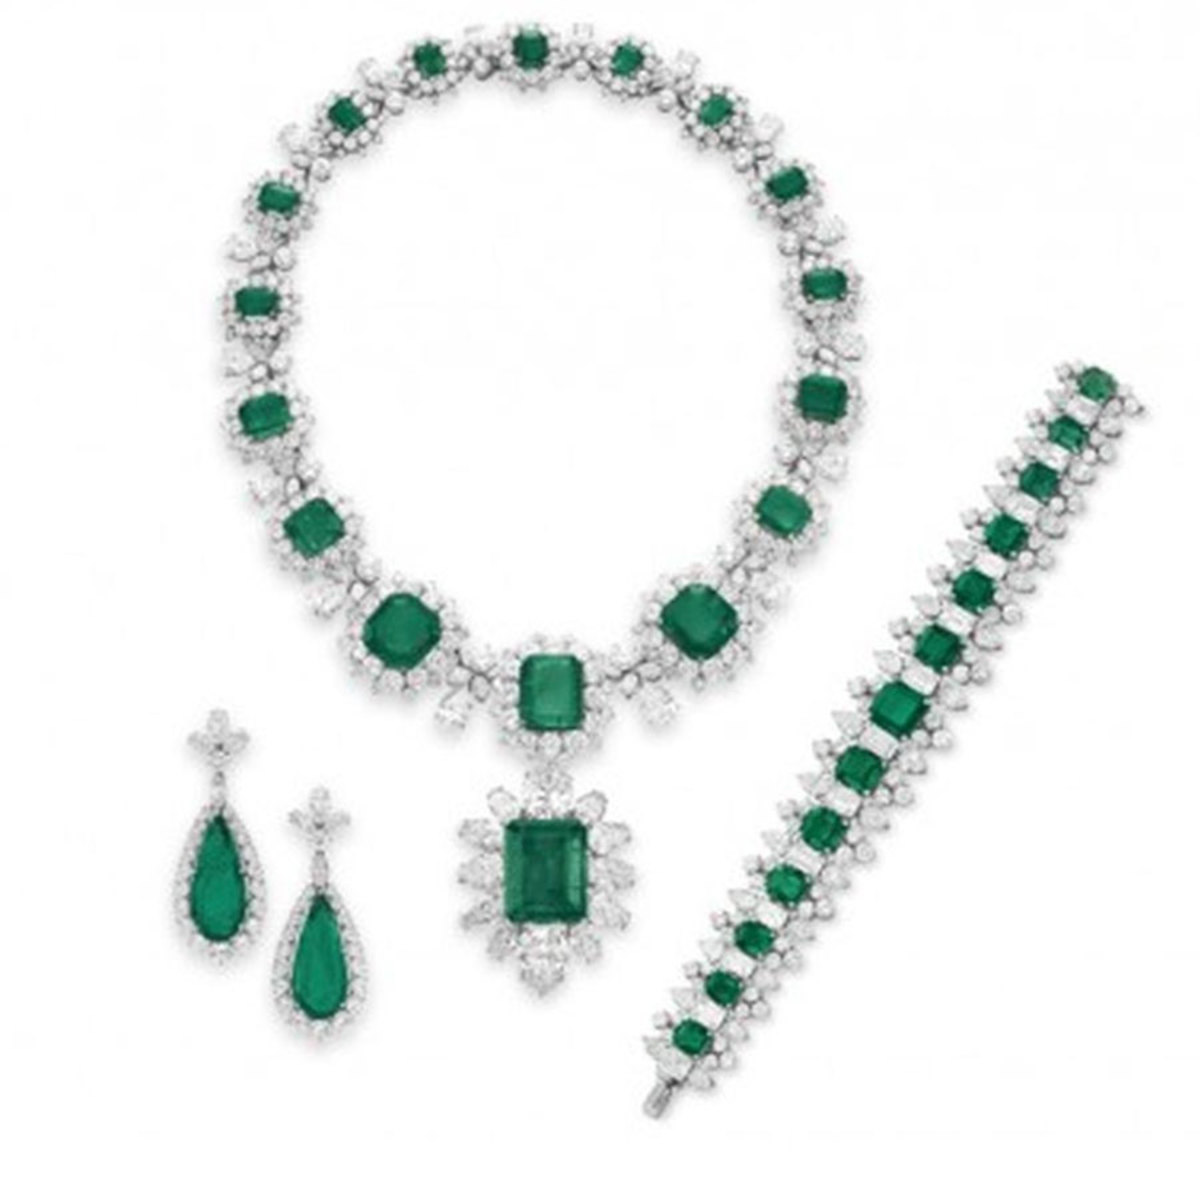 The BVLGARI emerald-and-diamond pieces Burton gifted to Taylor over the years: the necklace, 1962, sold for $6.1 million; the brooch, 1958, suspended from the necklace, sold for $6.5 million; the earrings, 1960, sold for $3.2 million; and the bracelet, 1963, sold for $4 million.